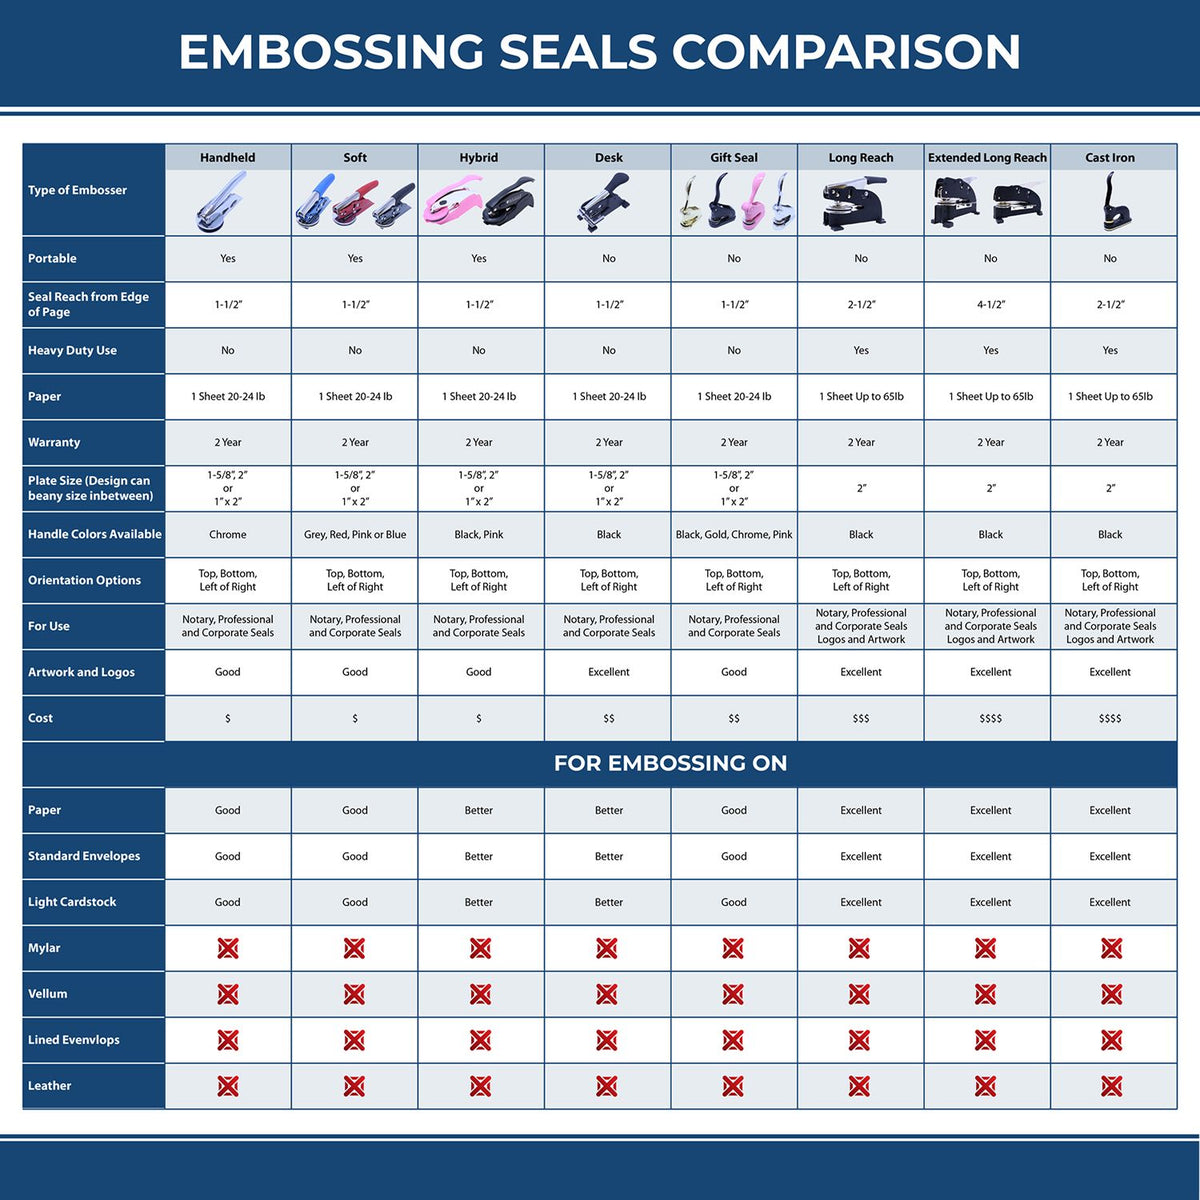 A comparison chart for the different types of mount models available for the Soft Pocket North Dakota Landscape Architect Embosser.